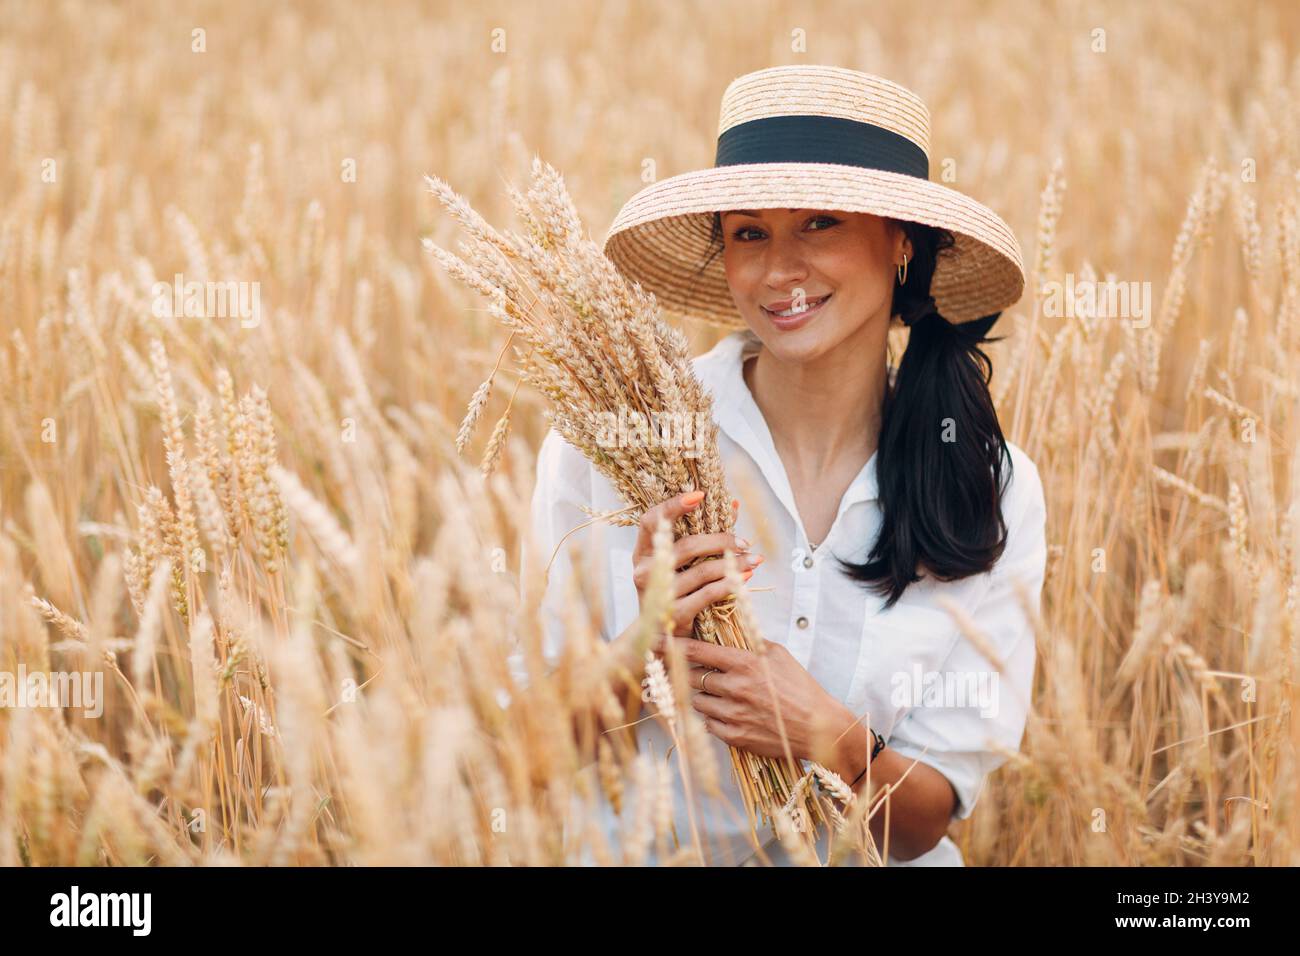 Young Woman in straw hat holding sheaf of wheat ears at agricultural ...